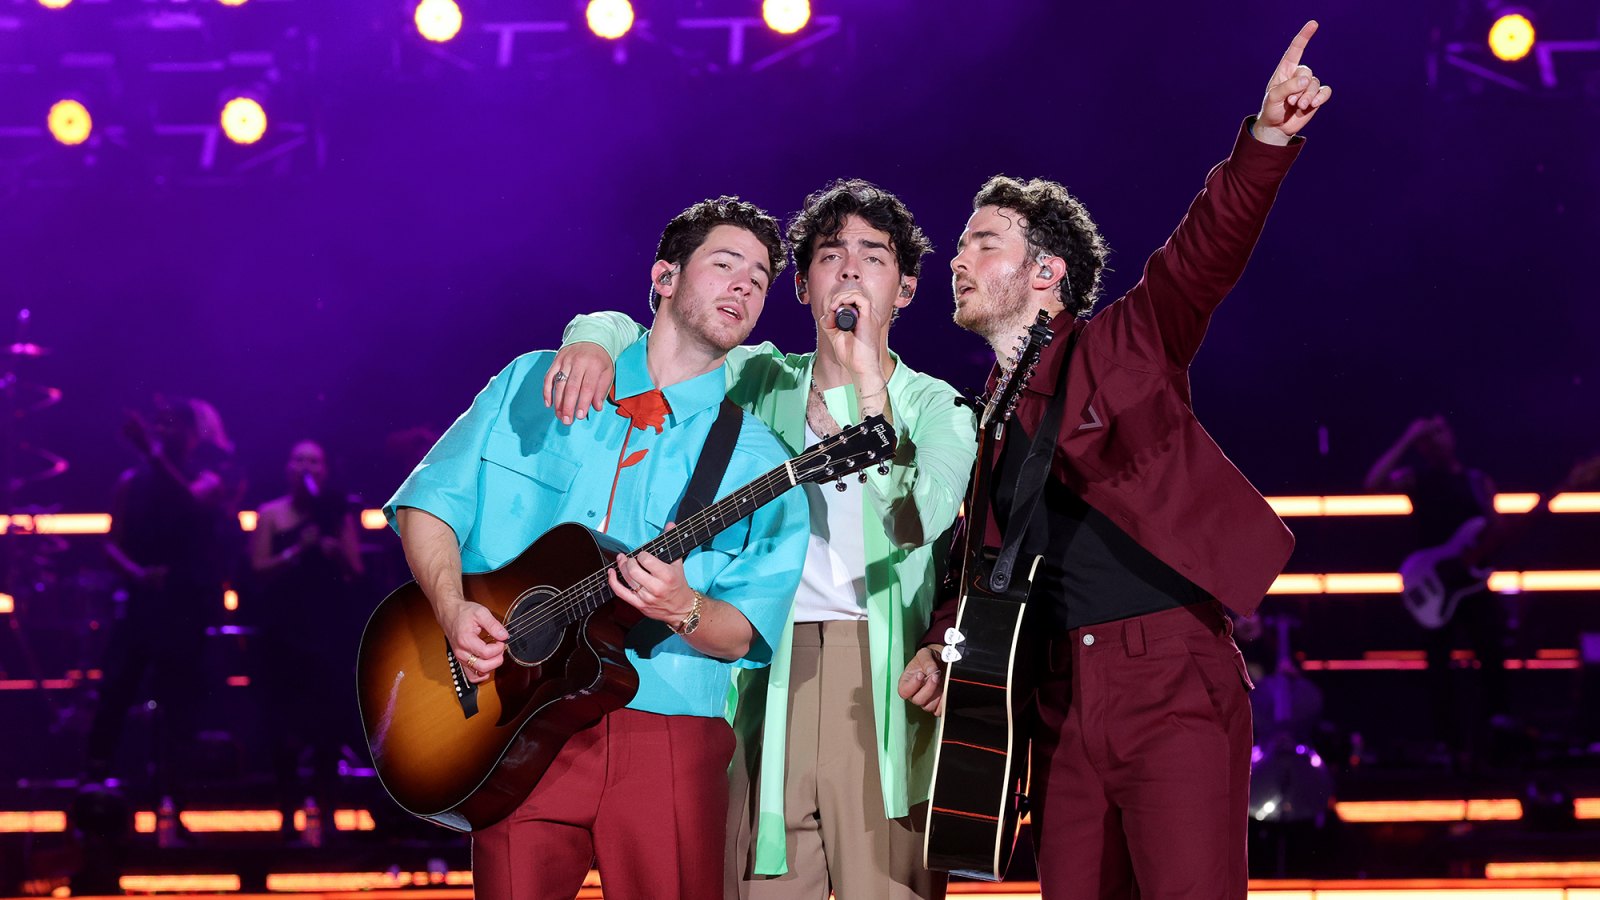 Jonas Brothers Announce 20th Anniversary Concert Tour in 2025: 'We're Gonna Do This Thing Again'